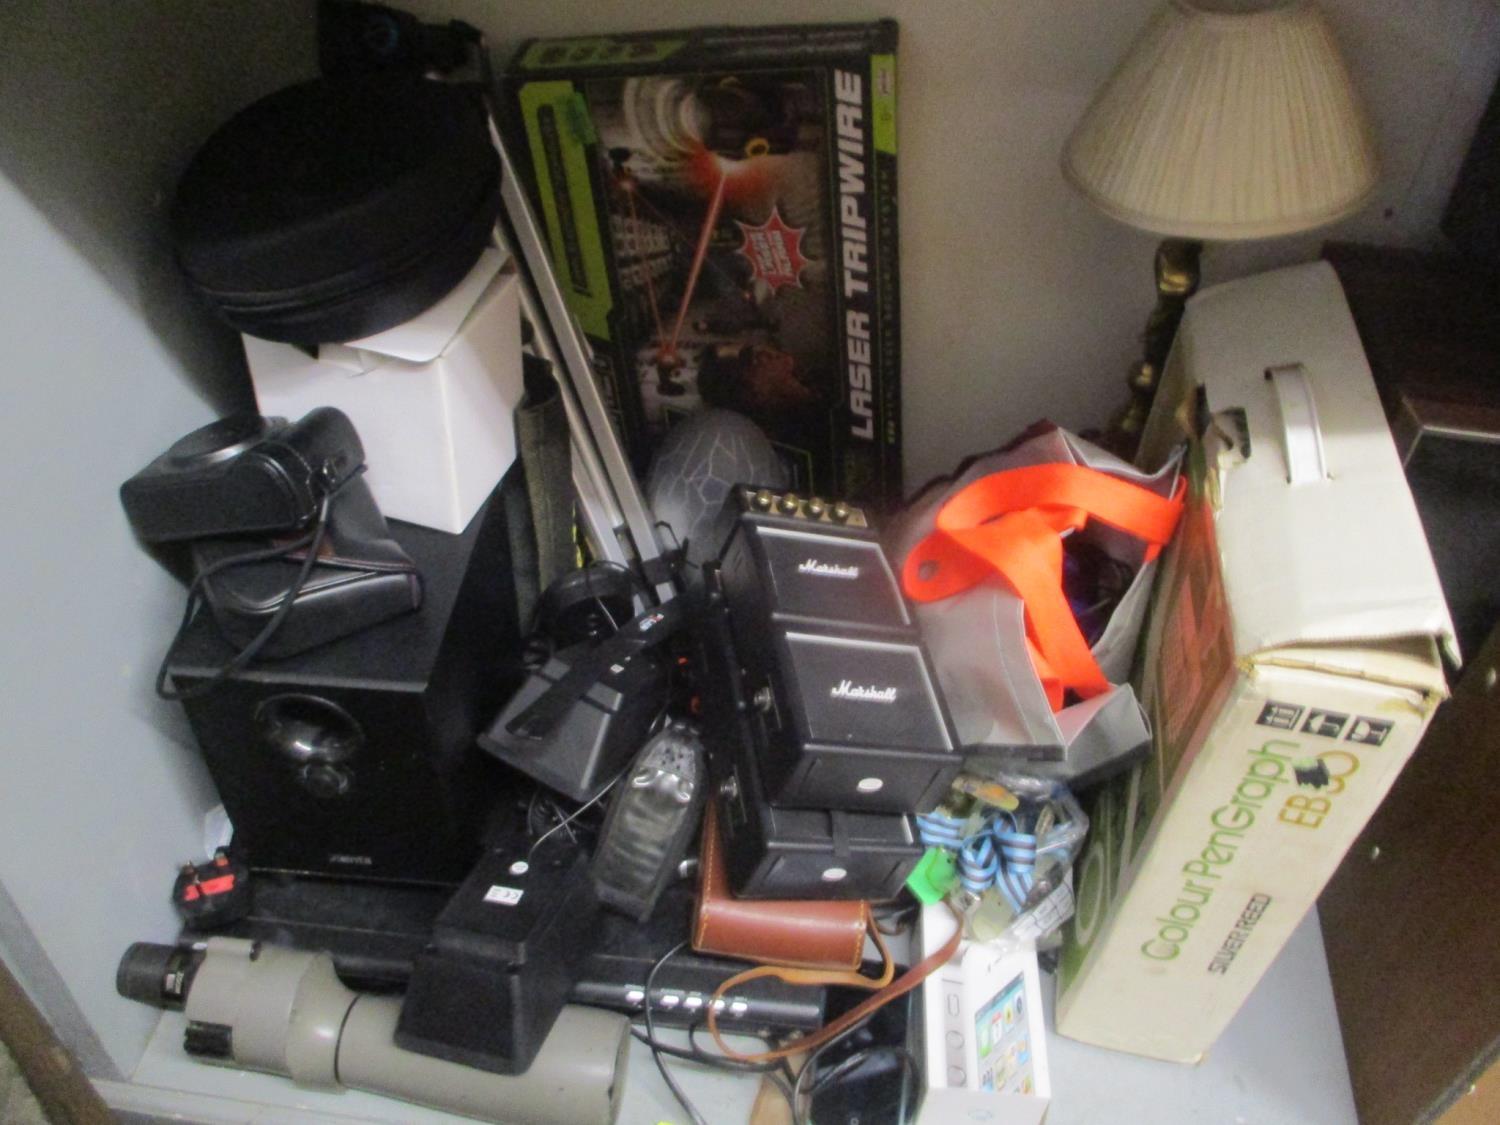 A mixed lot to include mobile phones, watches, tripod stand, DVD player and other items